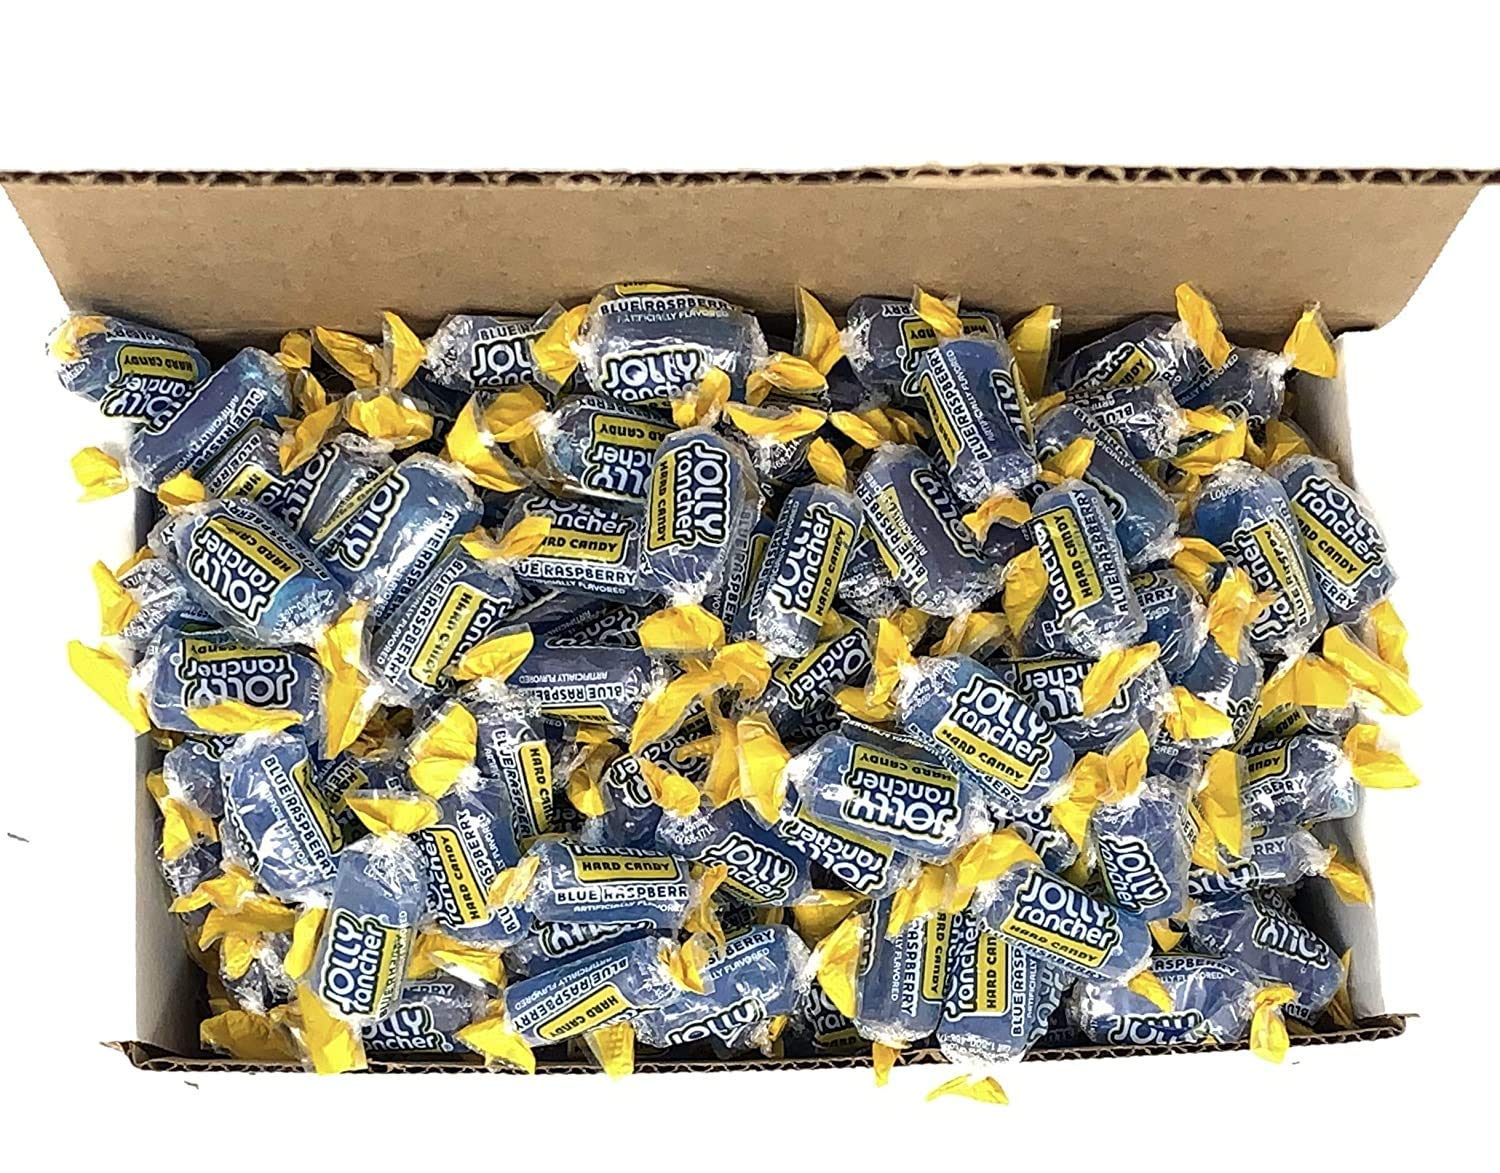 Jolly Rancher Hard Candy in Box, 1lb (Individually Wrapped)